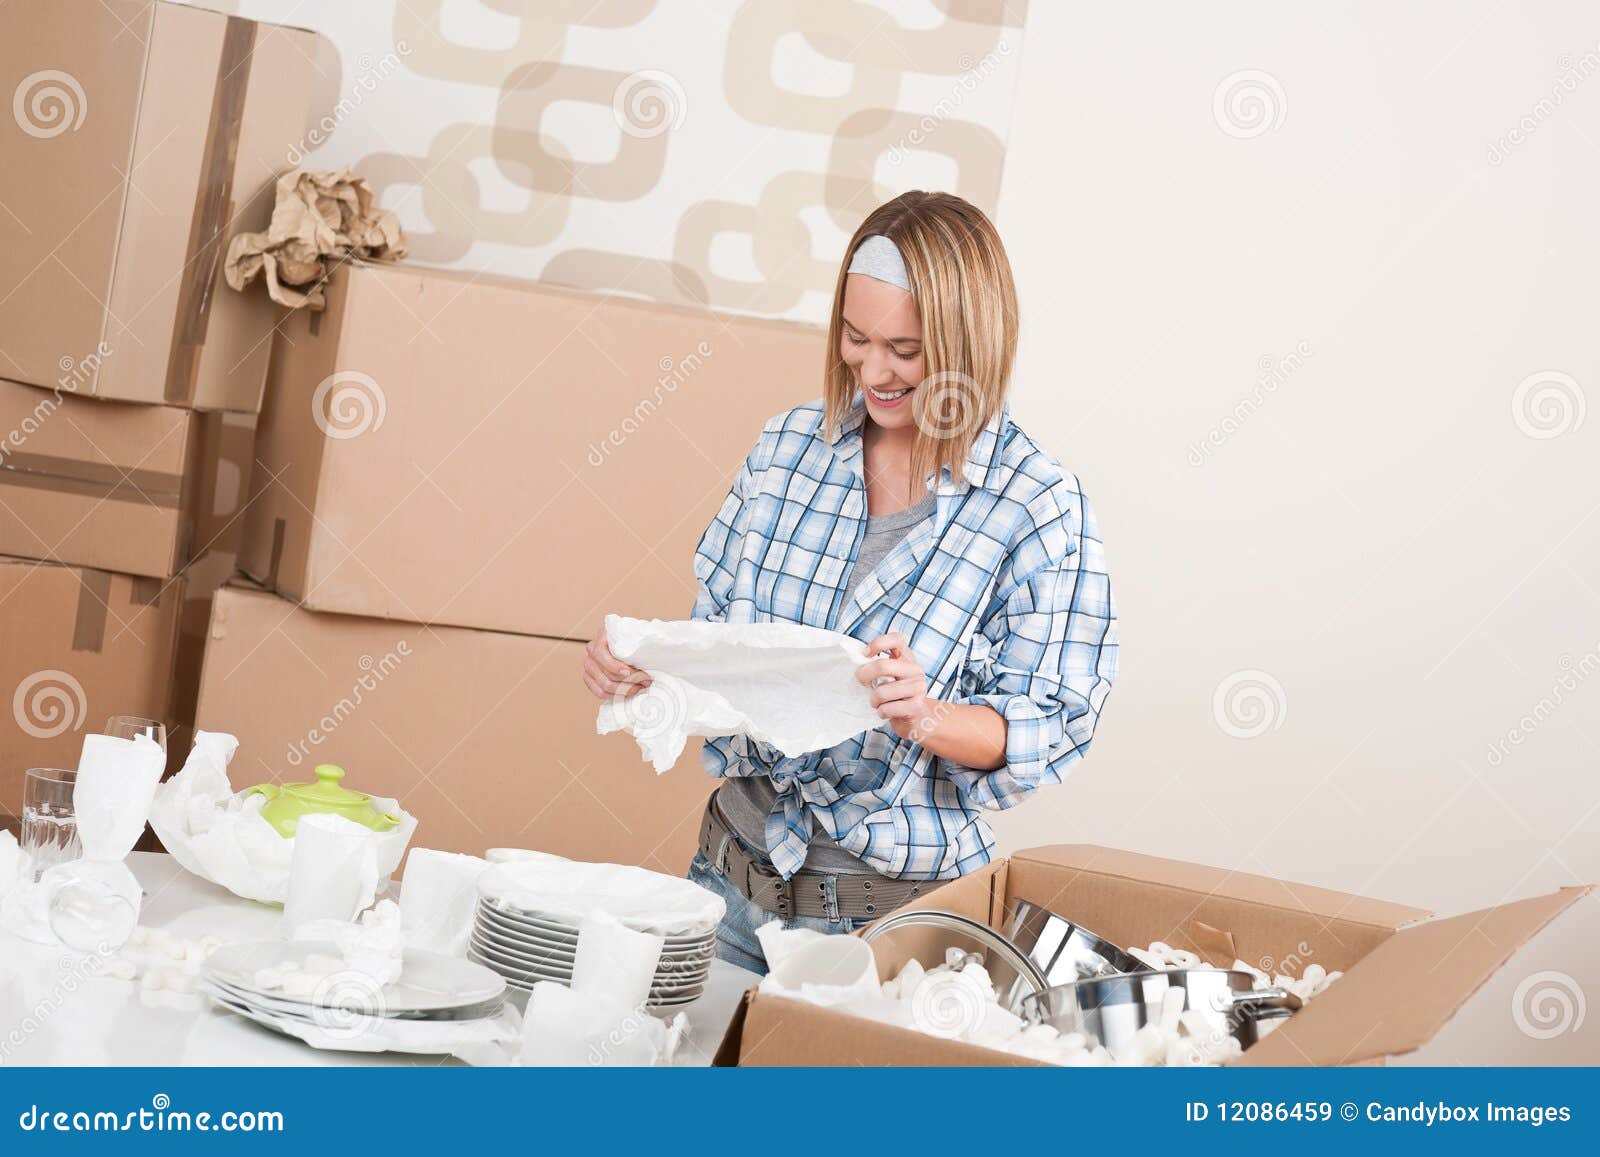 moving house unpacking services